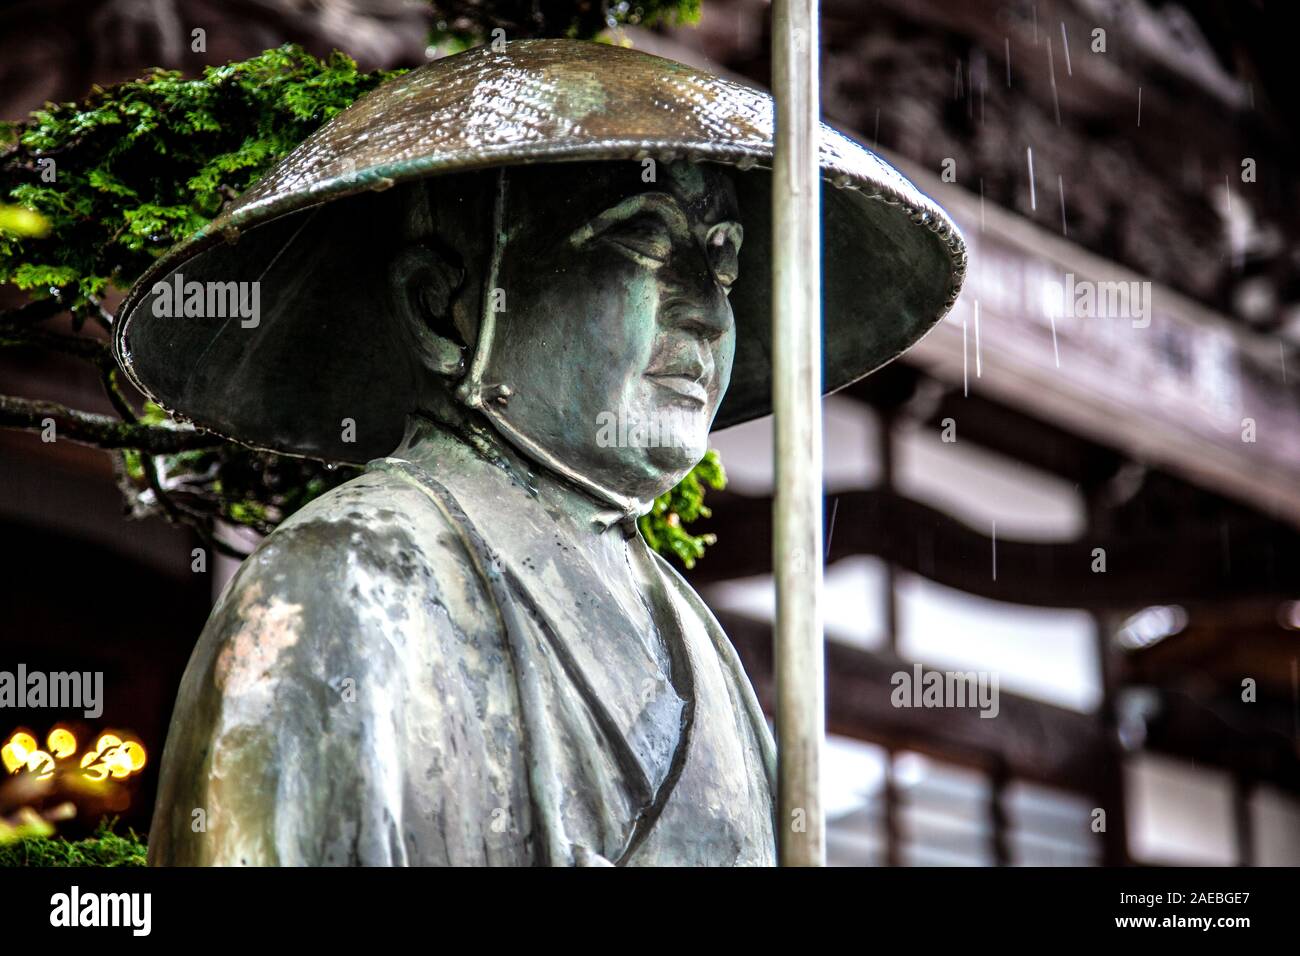 Statue of a man in a hat outside Baigan-ji Temple in rainy Ome, Tokyo, Japan Stock Photo